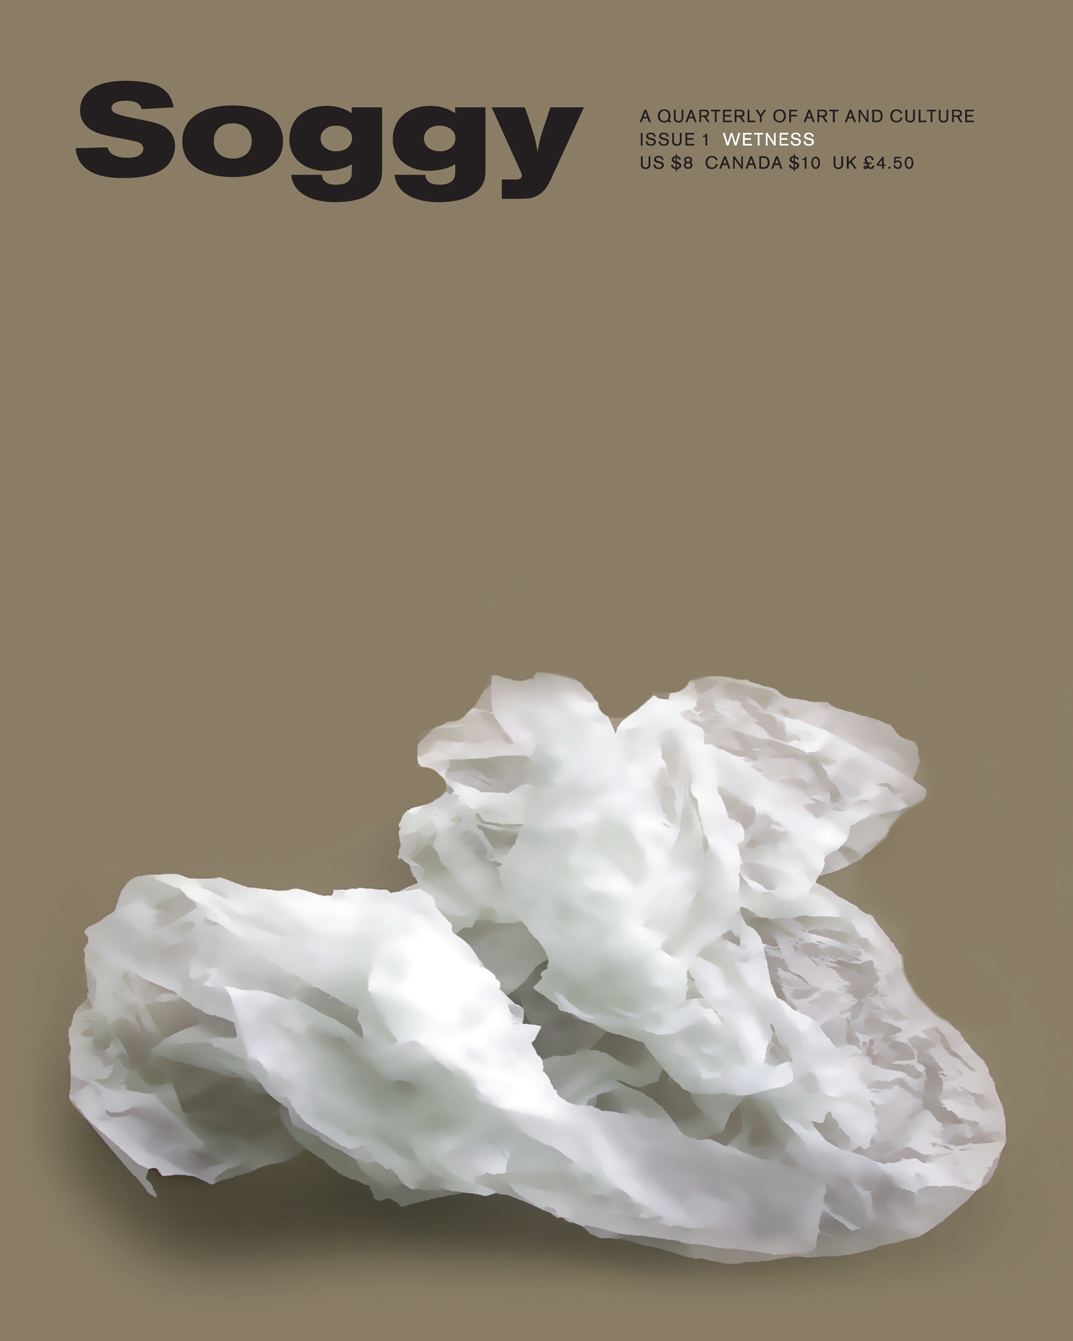 The cover for Soggy, a Quarterly of Art and Culture, Issue One: Wetness. The cover features a photograph of a thin white material, wet and crumpled.